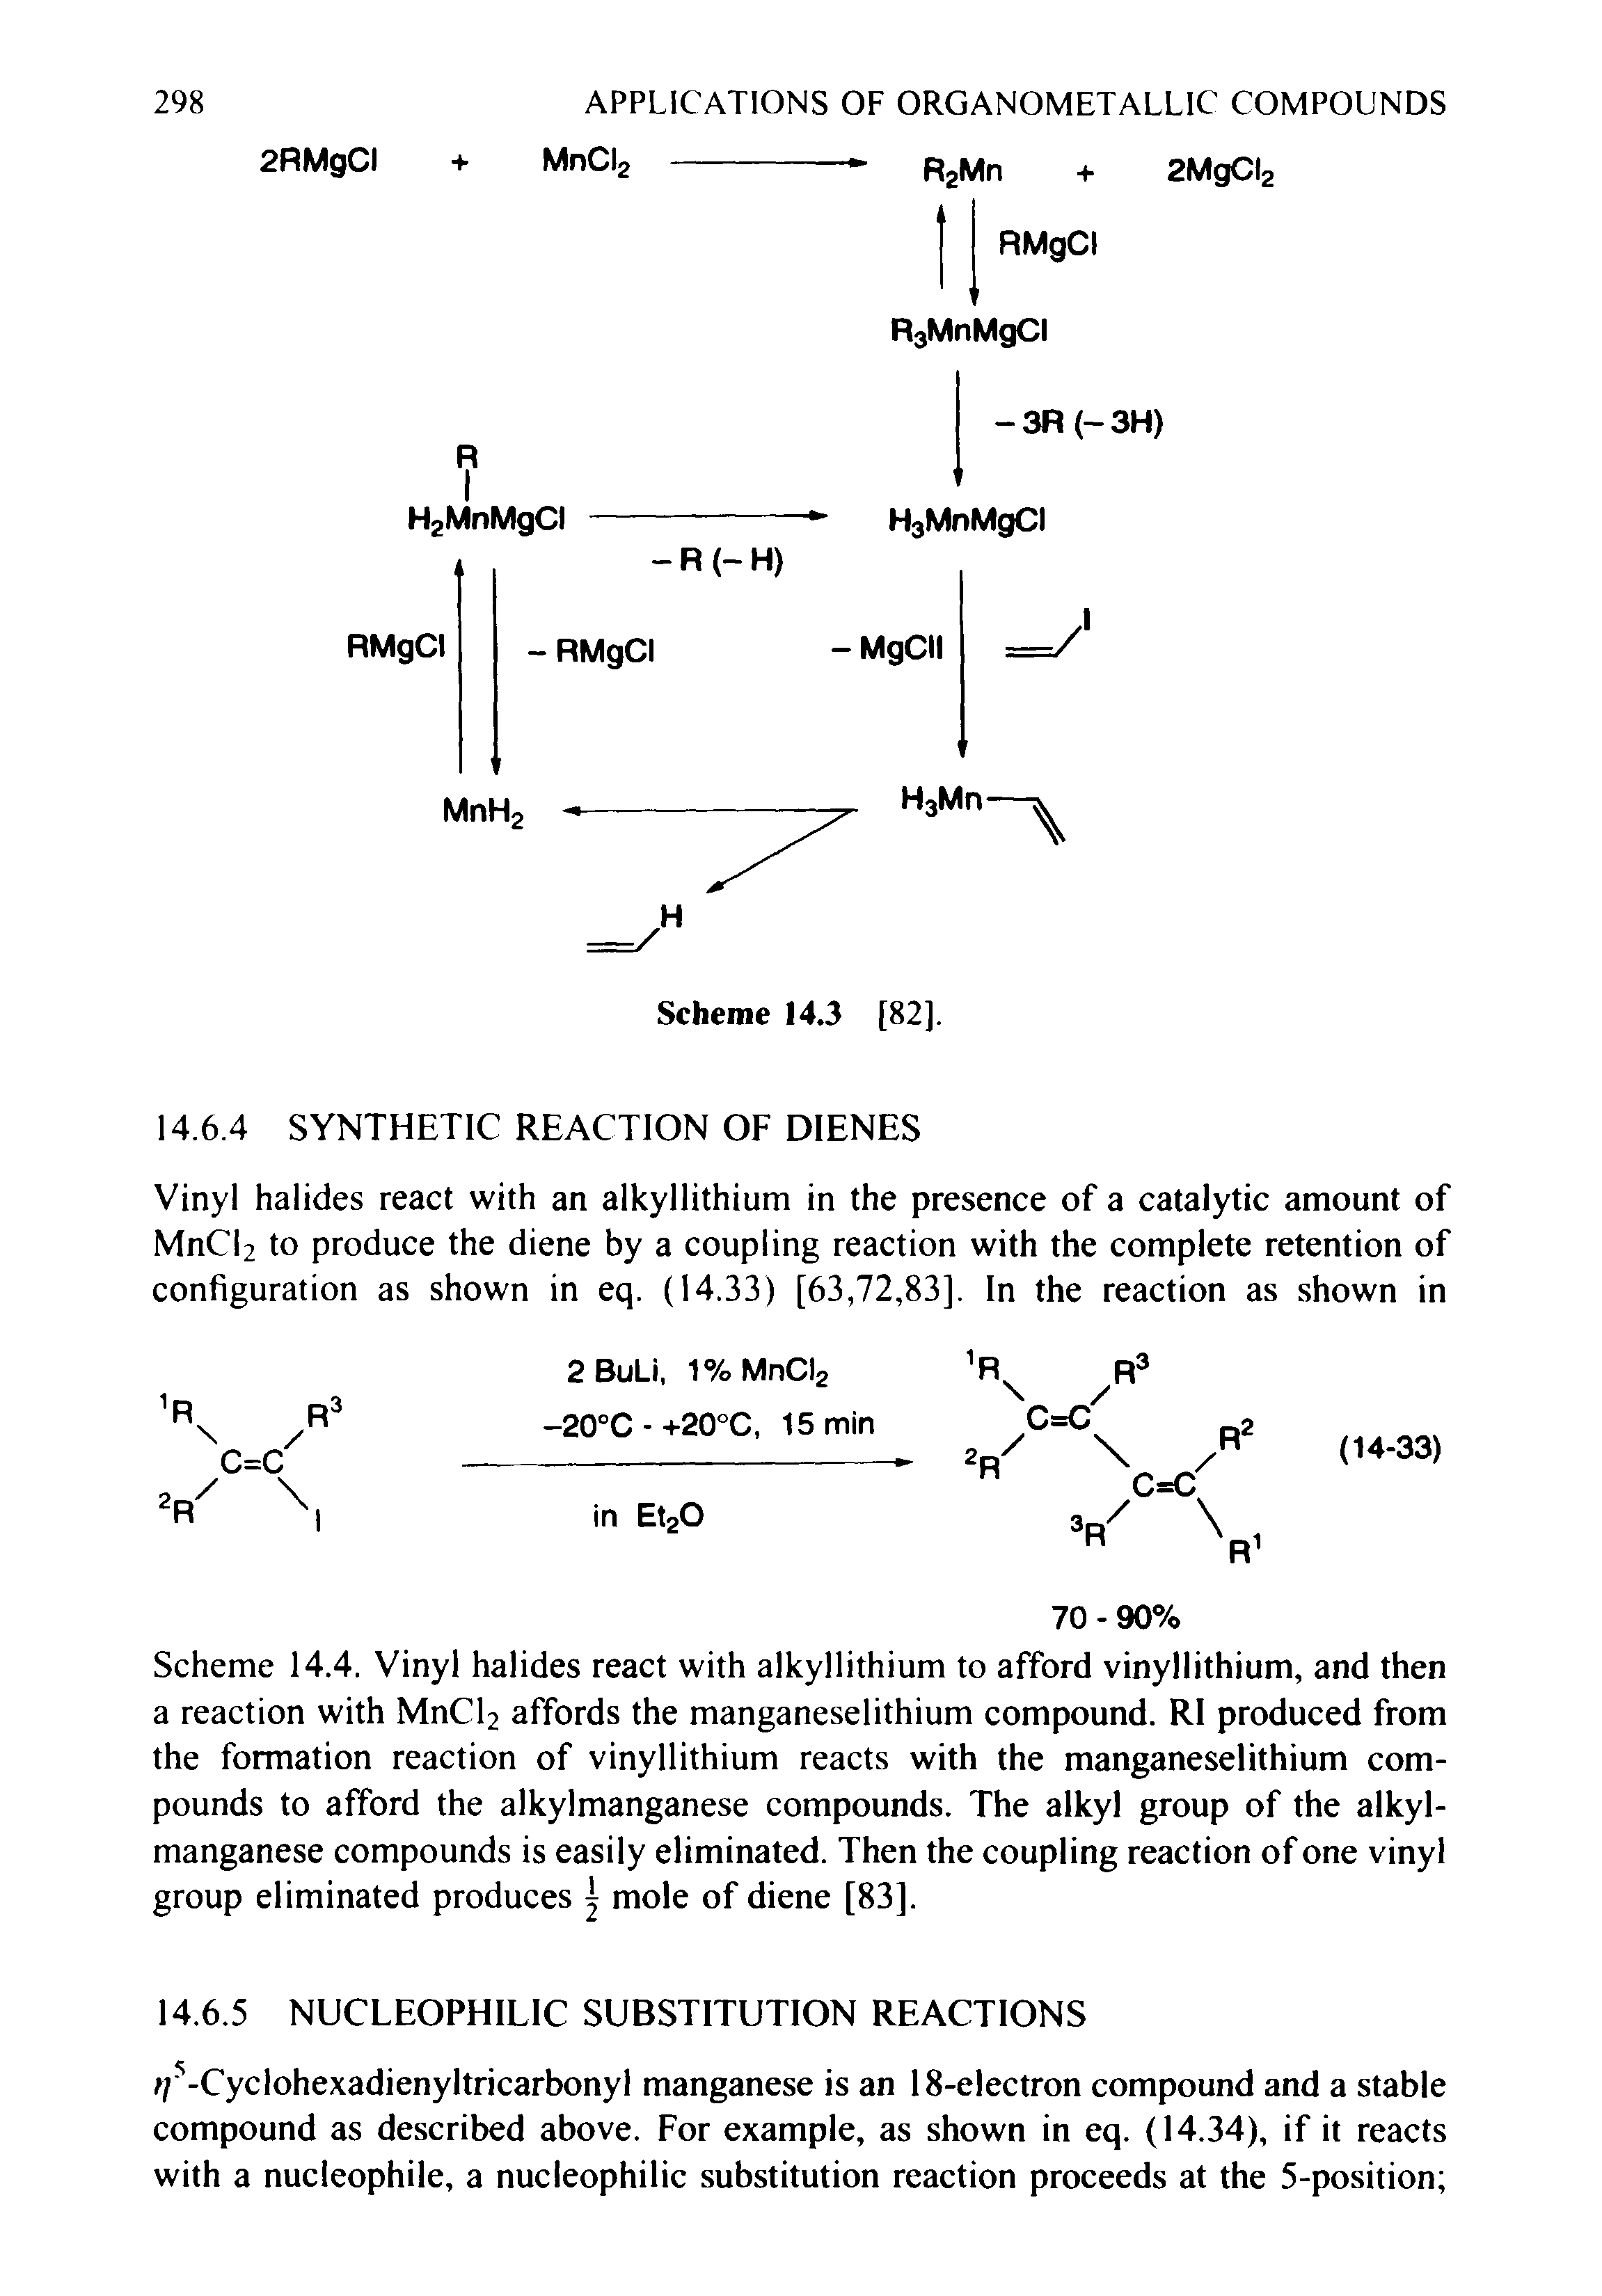 Scheme 14.4. Vinyl halides react with alkyllithium to afford vinyllithium, and then a reaction with MnCl2 affords the manganeselithium compound. RI produced from the formation reaction of vinyllithium reacts with the manganeselithium compounds to afford the alkylmanganese compounds. The alkyl group of the alkyl-manganese compounds is easily eliminated. Then the coupling reaction of one vinyl group eliminated produces mole of diene [83].